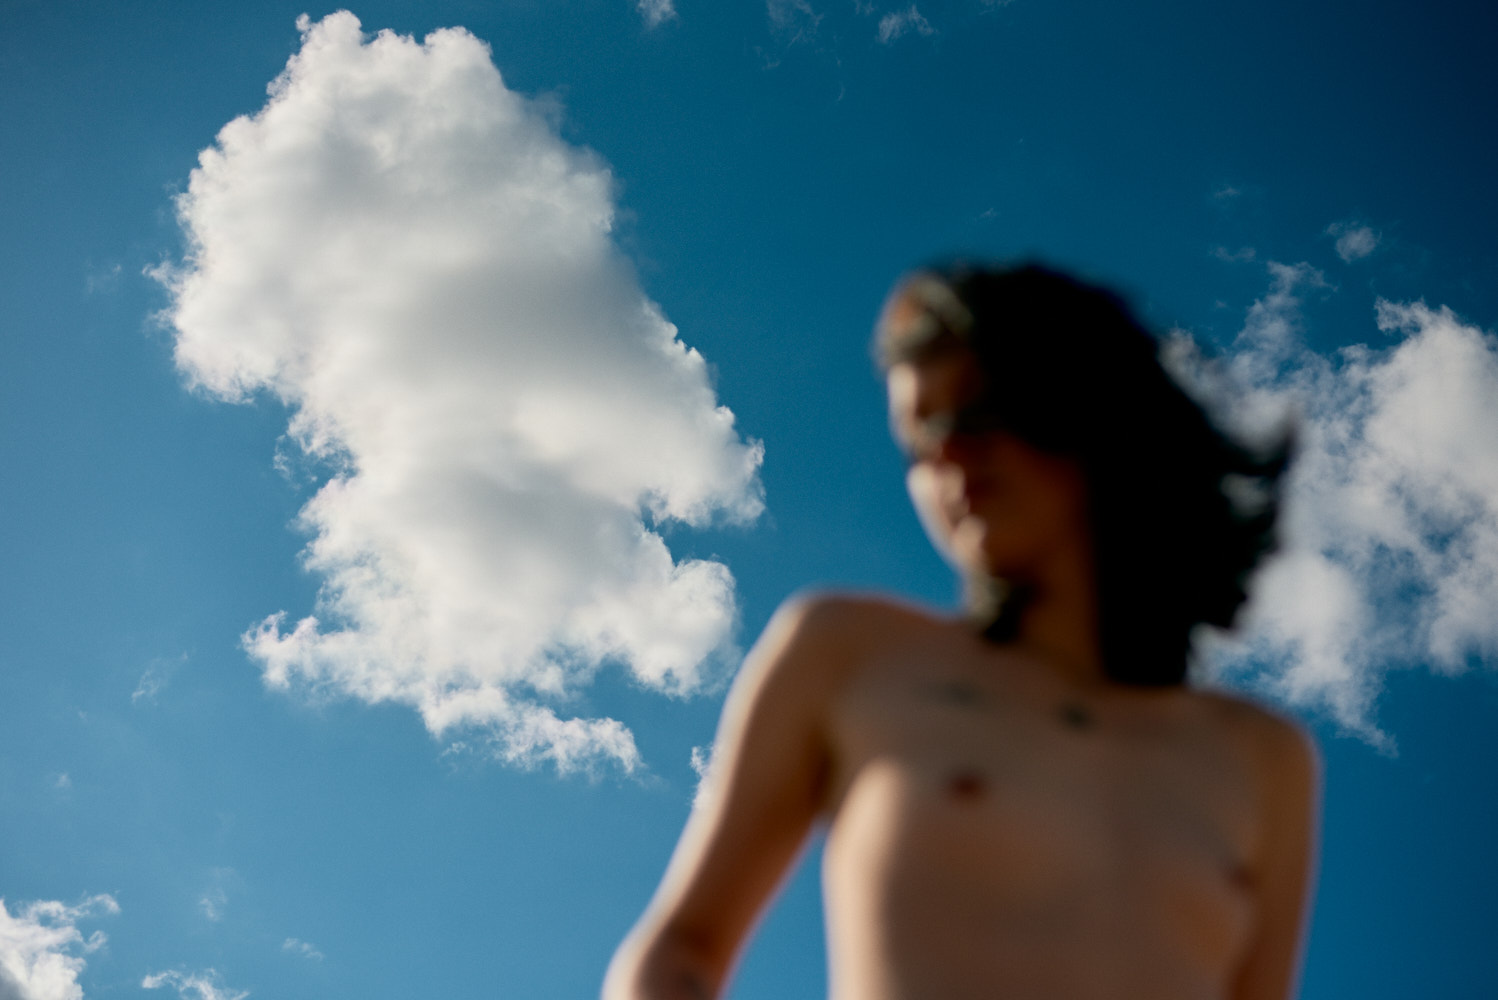 Naturist & nature photography by James Johnstone